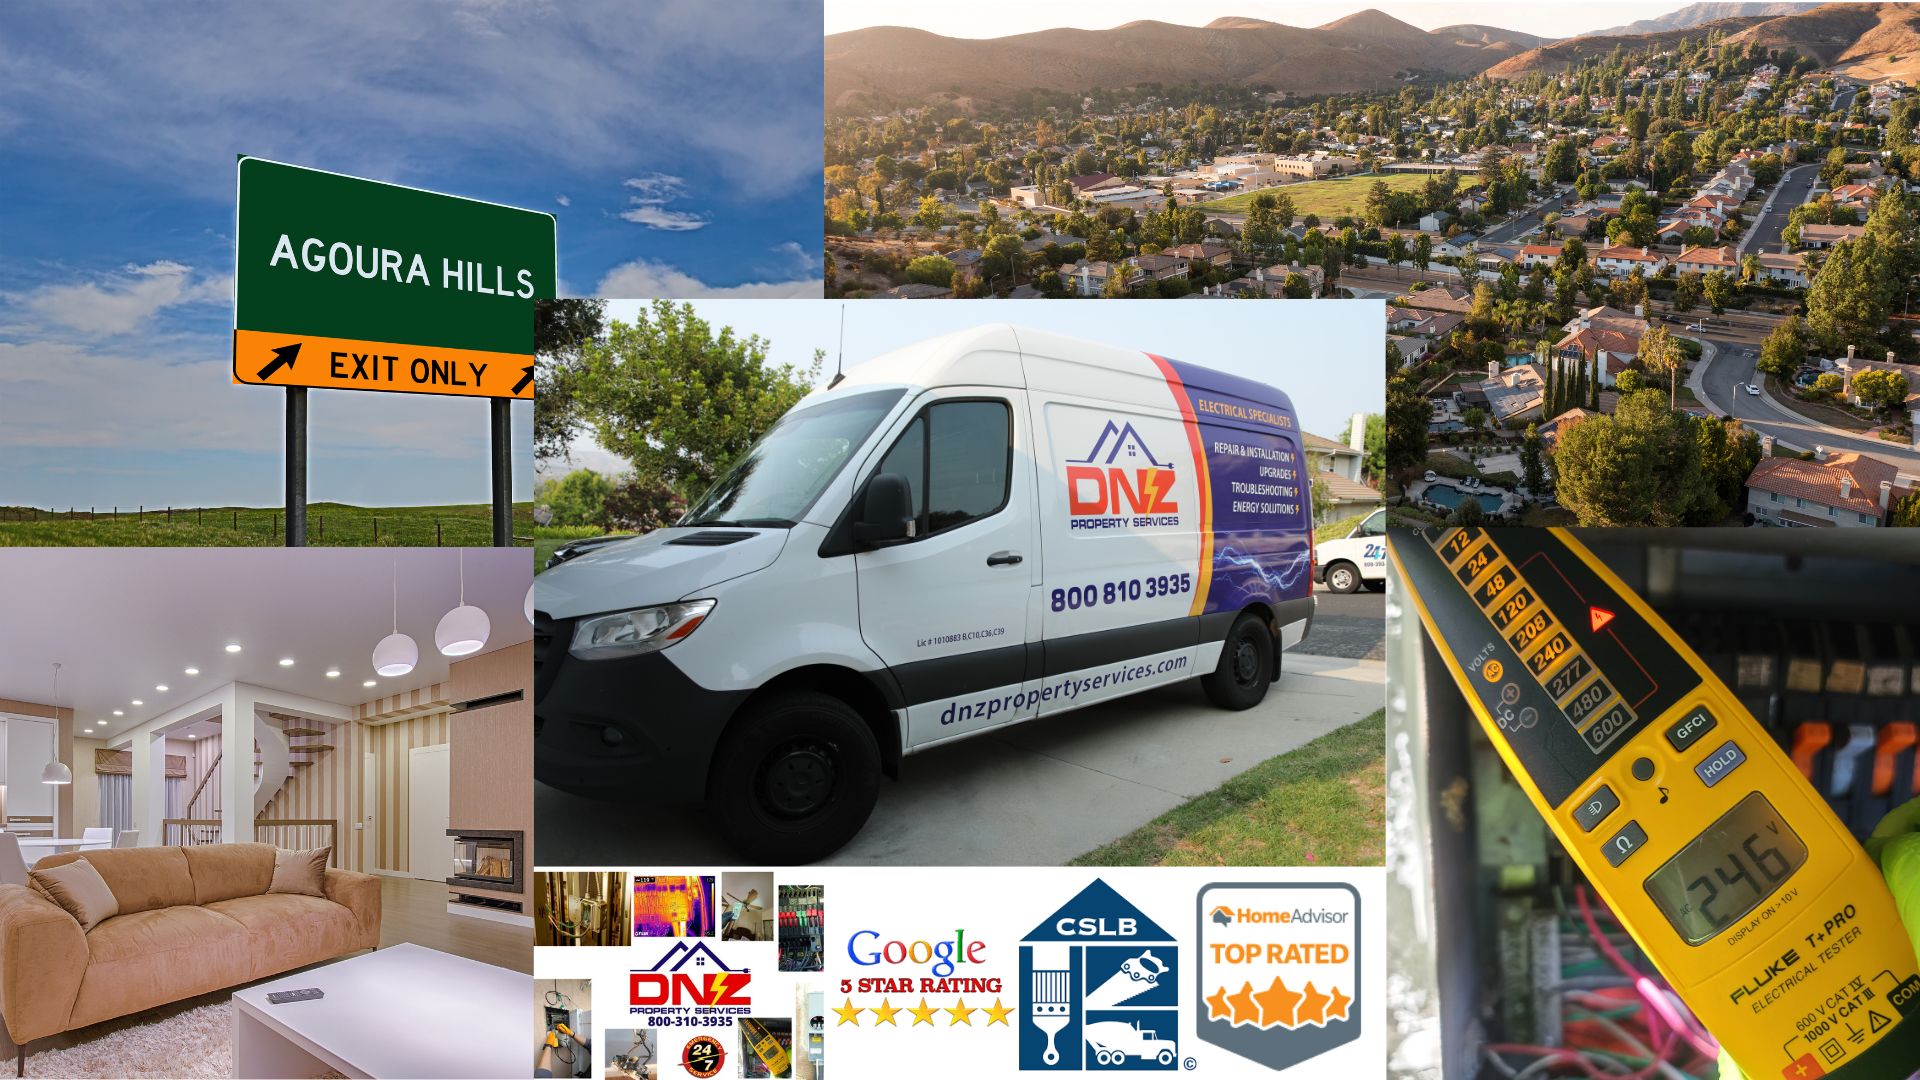 for DNZ Property Services the electrical specialists in Agoura Hills with more than 25 years of experience and exceptional customer service.